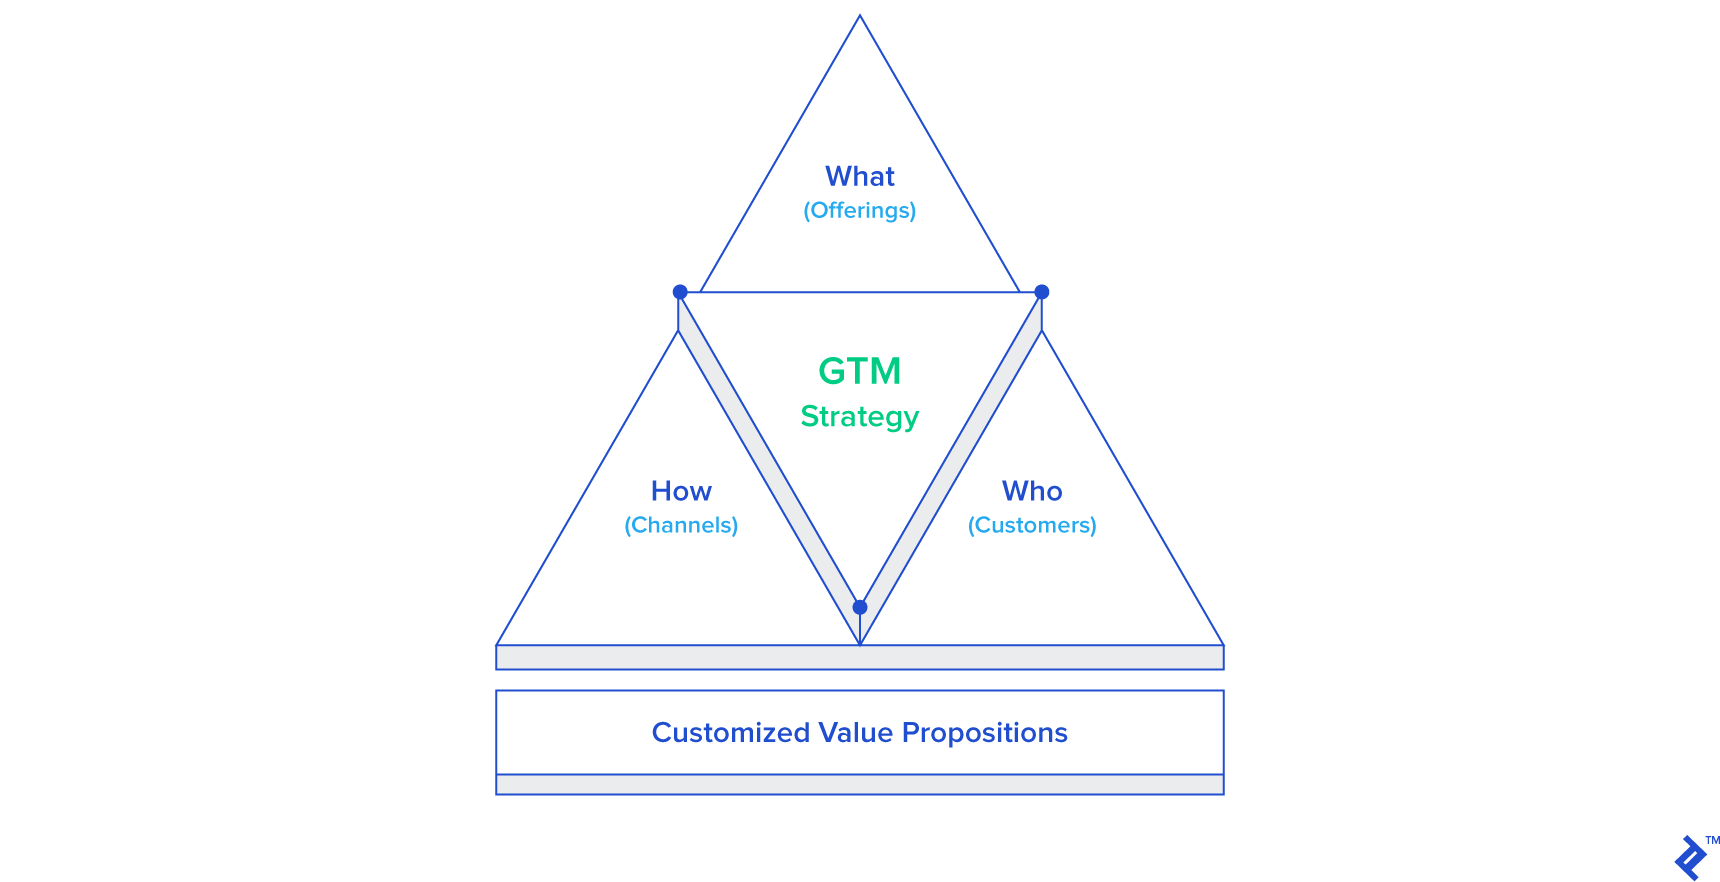 Diagram of who, what, how, and customized value propositions, the facets of a go to market strategy